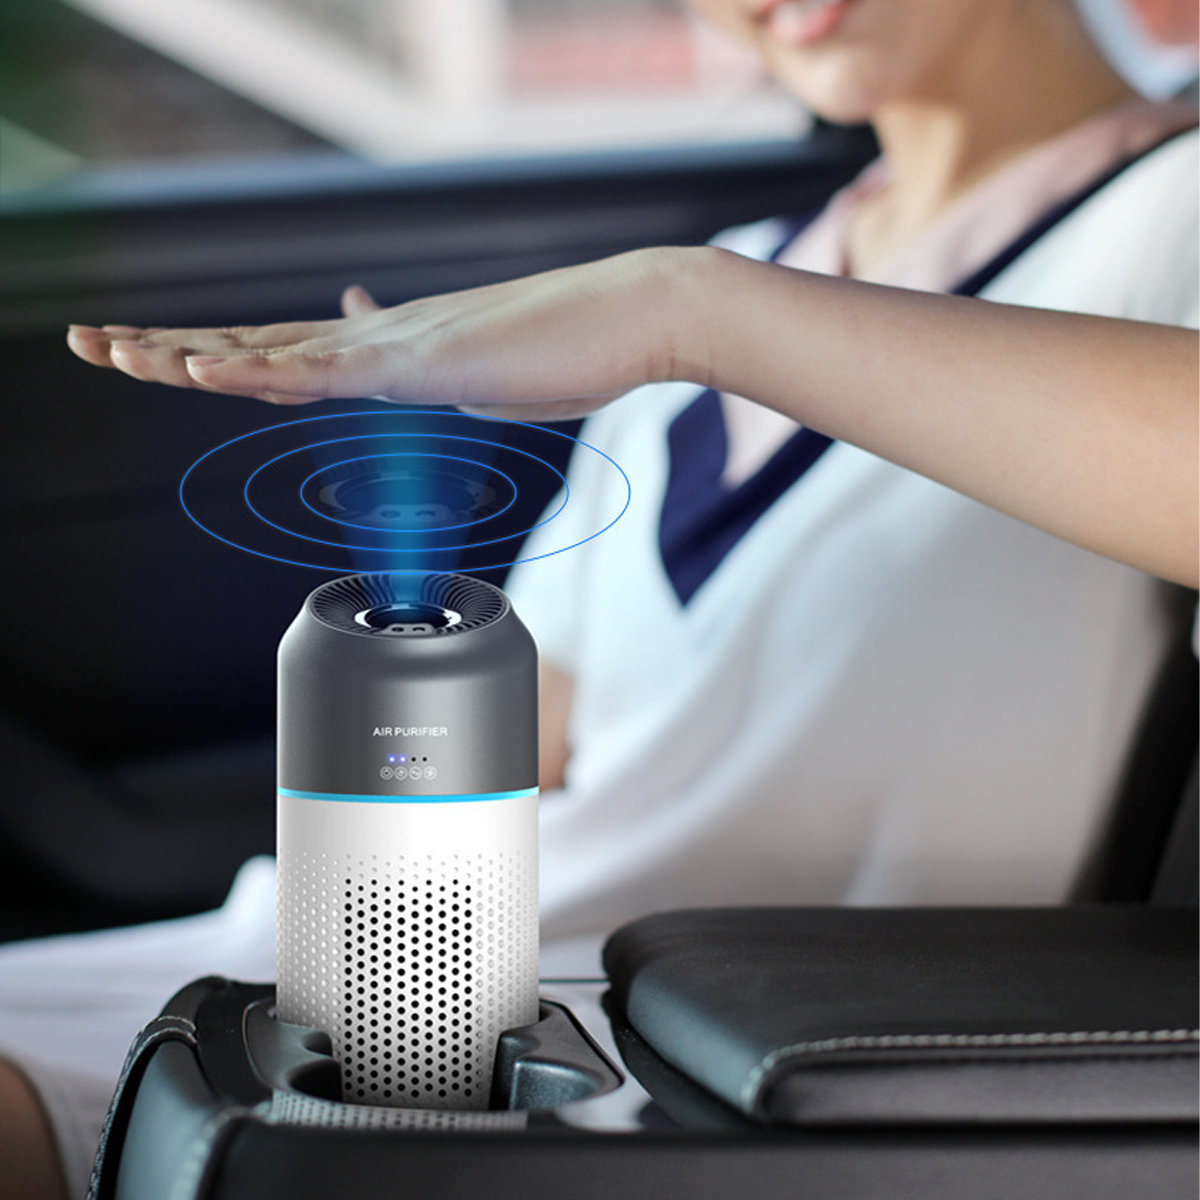 Mini-Air-Purifier-Double-layer-Filter-Purification-USB-Charging-Low-Noise-Removal-of-Formaldehyde-PM-1774239-10